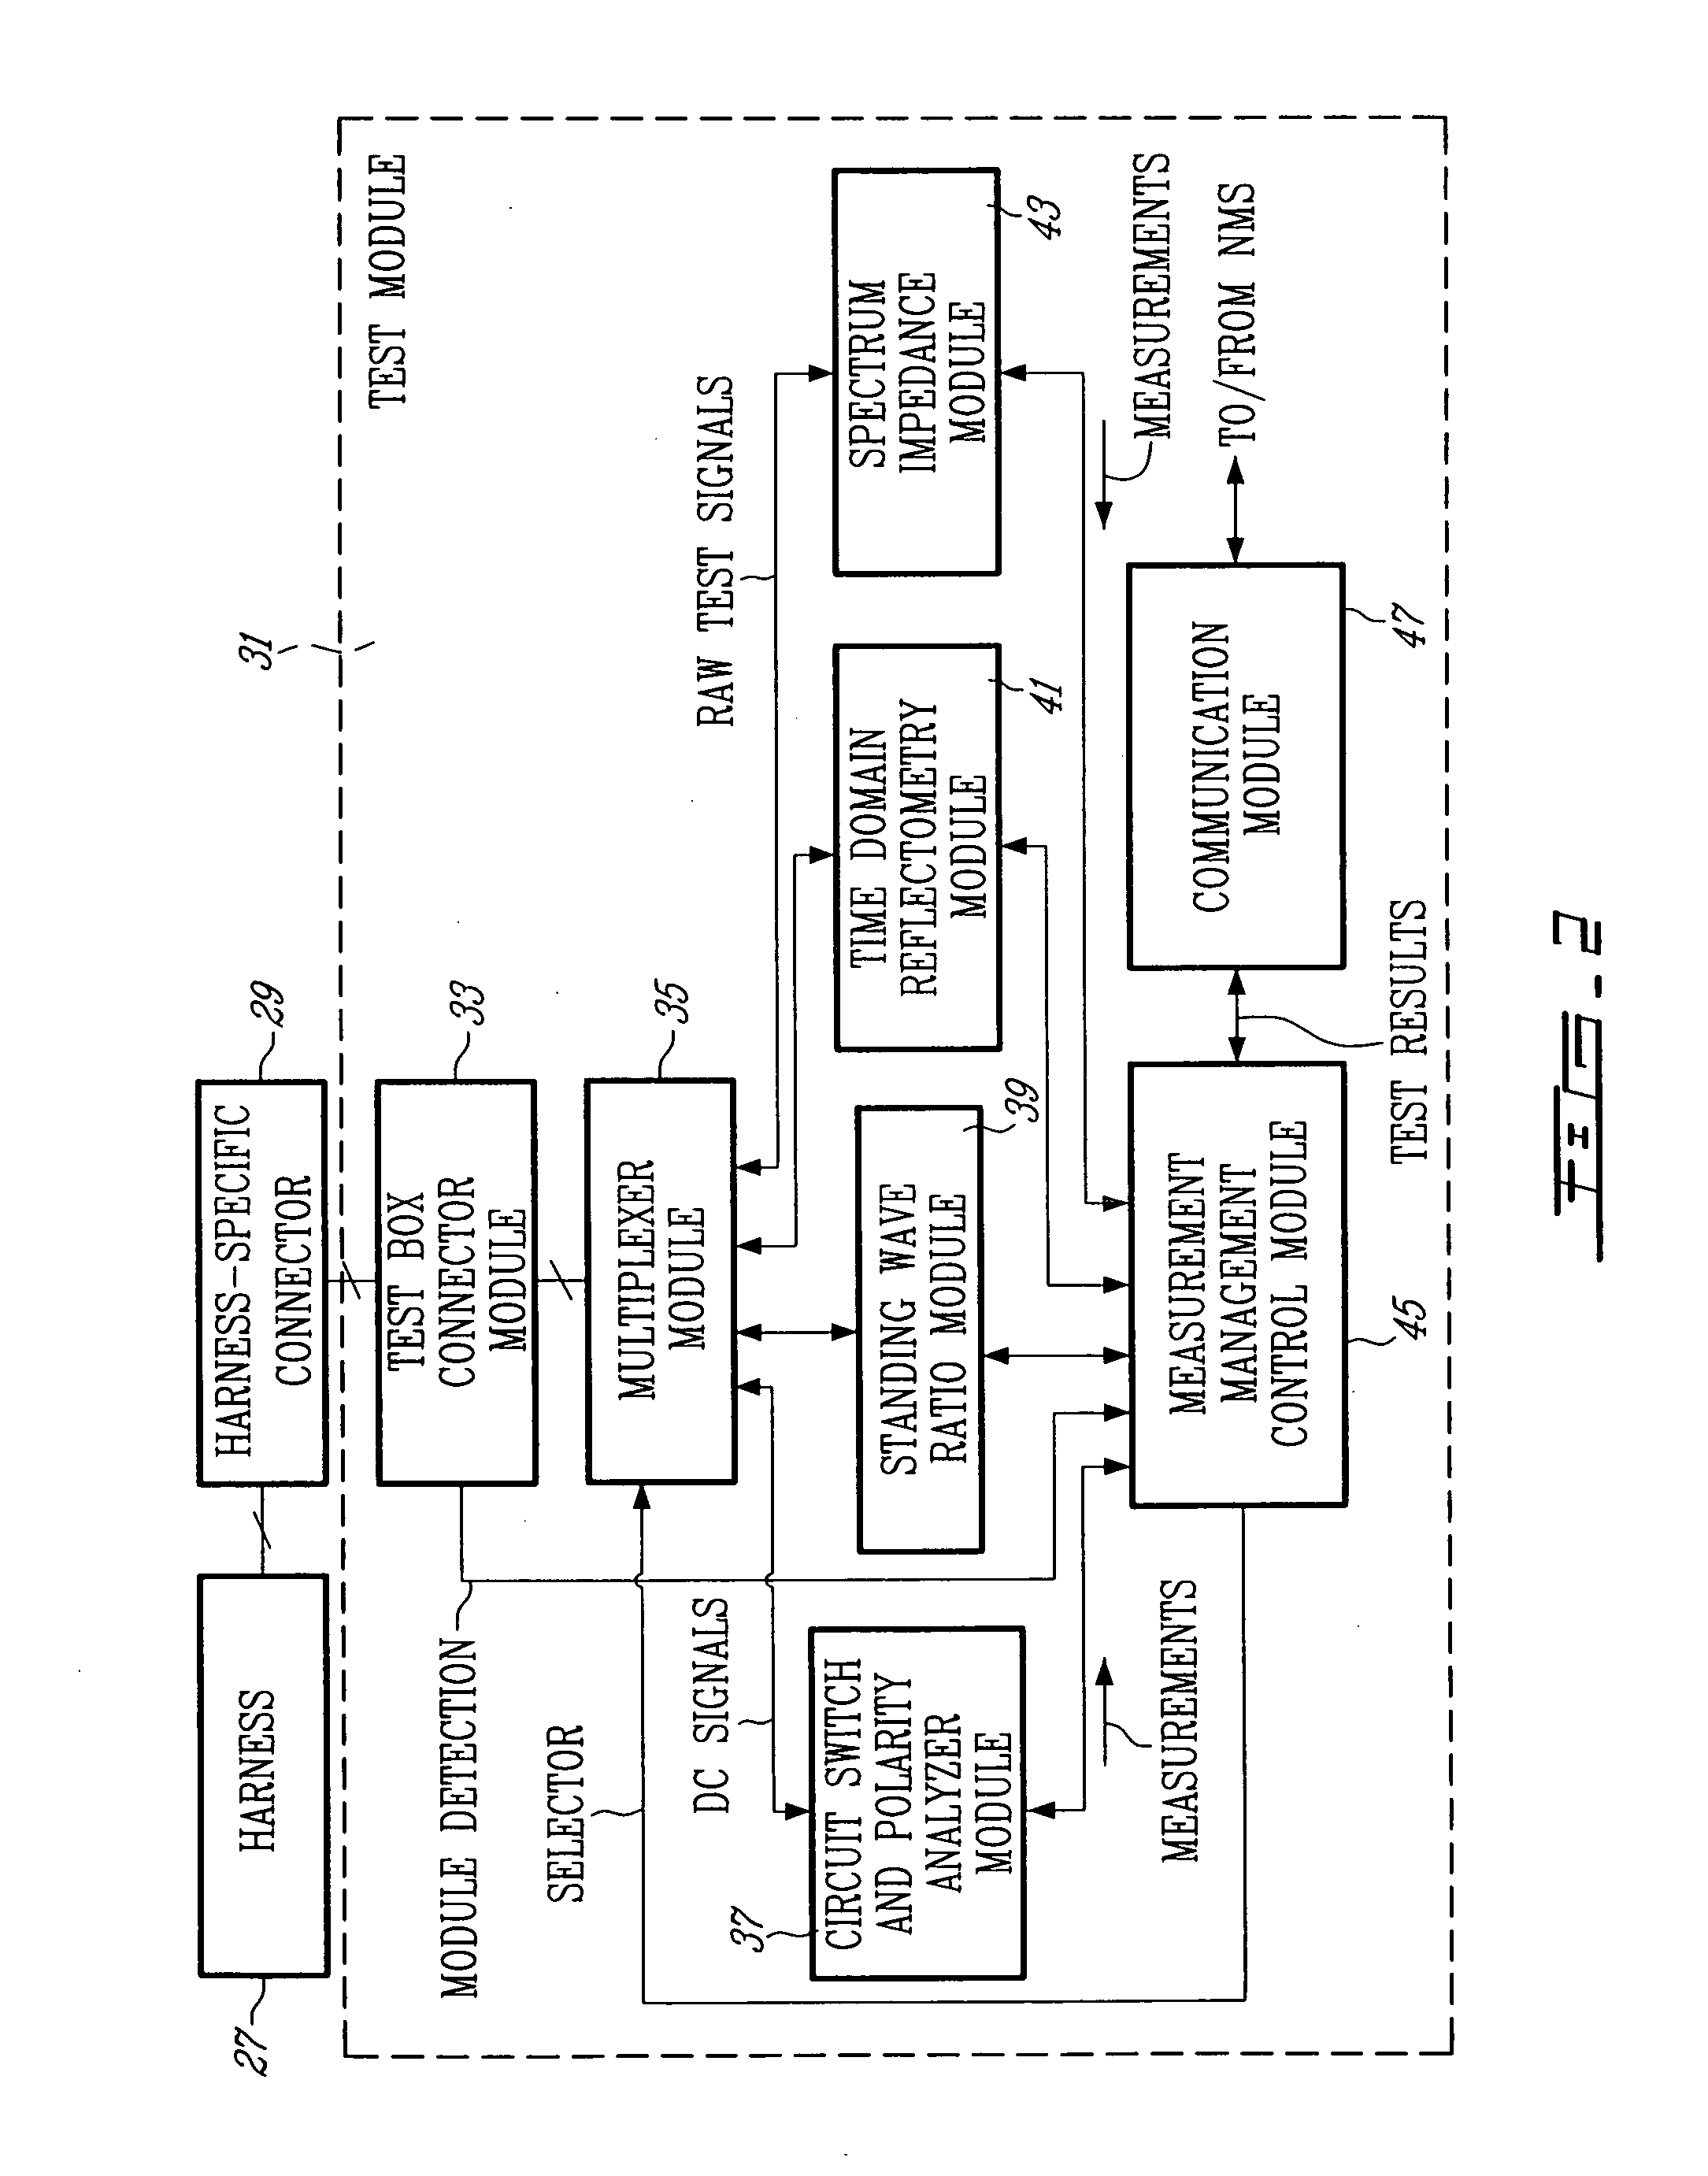 Wireless portable automated harness scanner system and method therefor